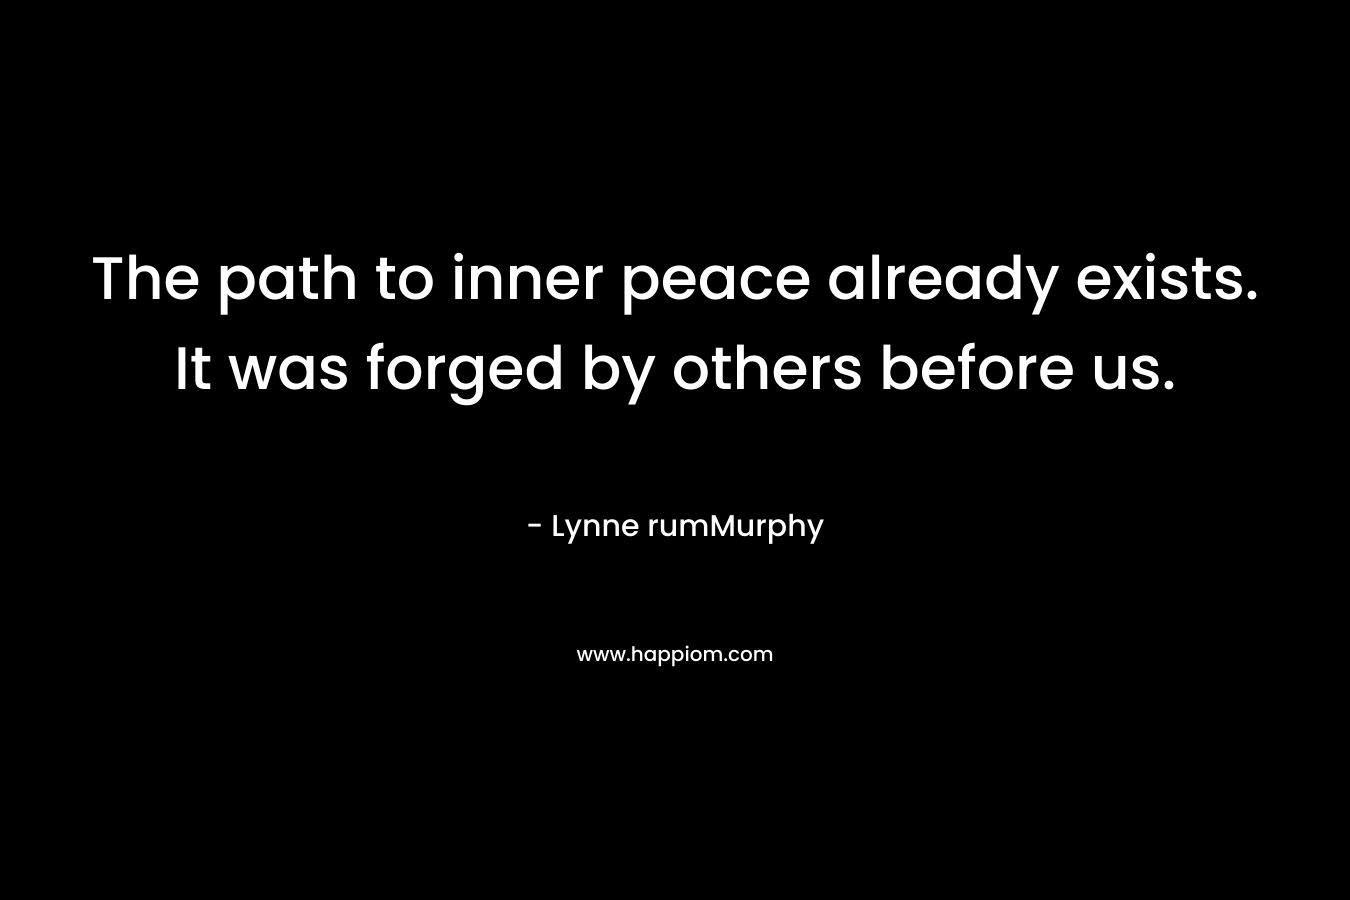 The path to inner peace already exists. It was forged by others before us.